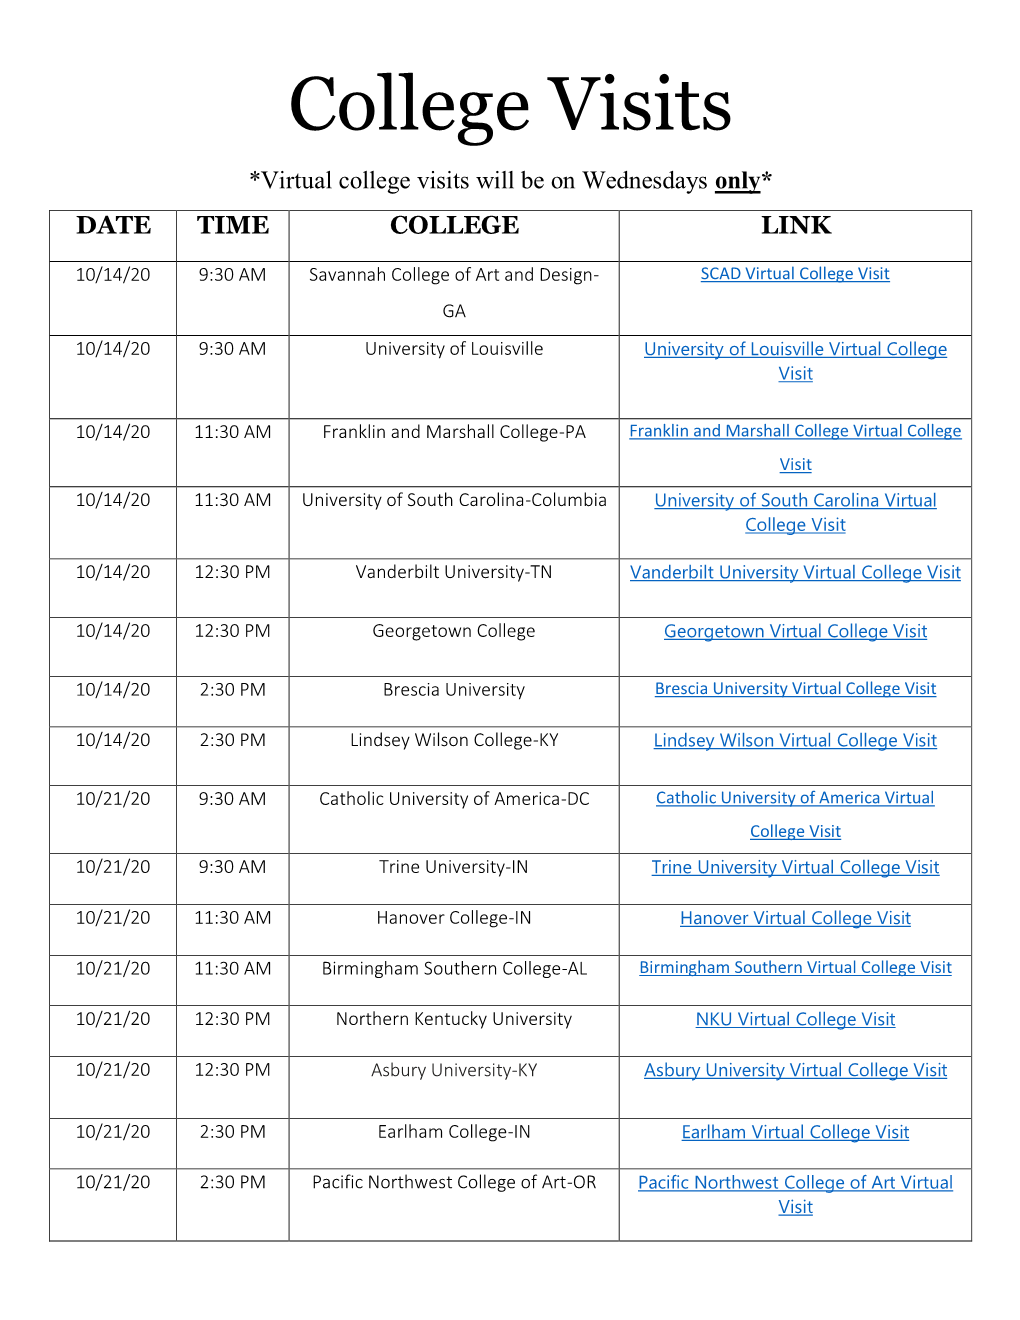 College Visits *Virtual College Visits Will Be on Wednesdays Only* DATE TIME COLLEGE LINK